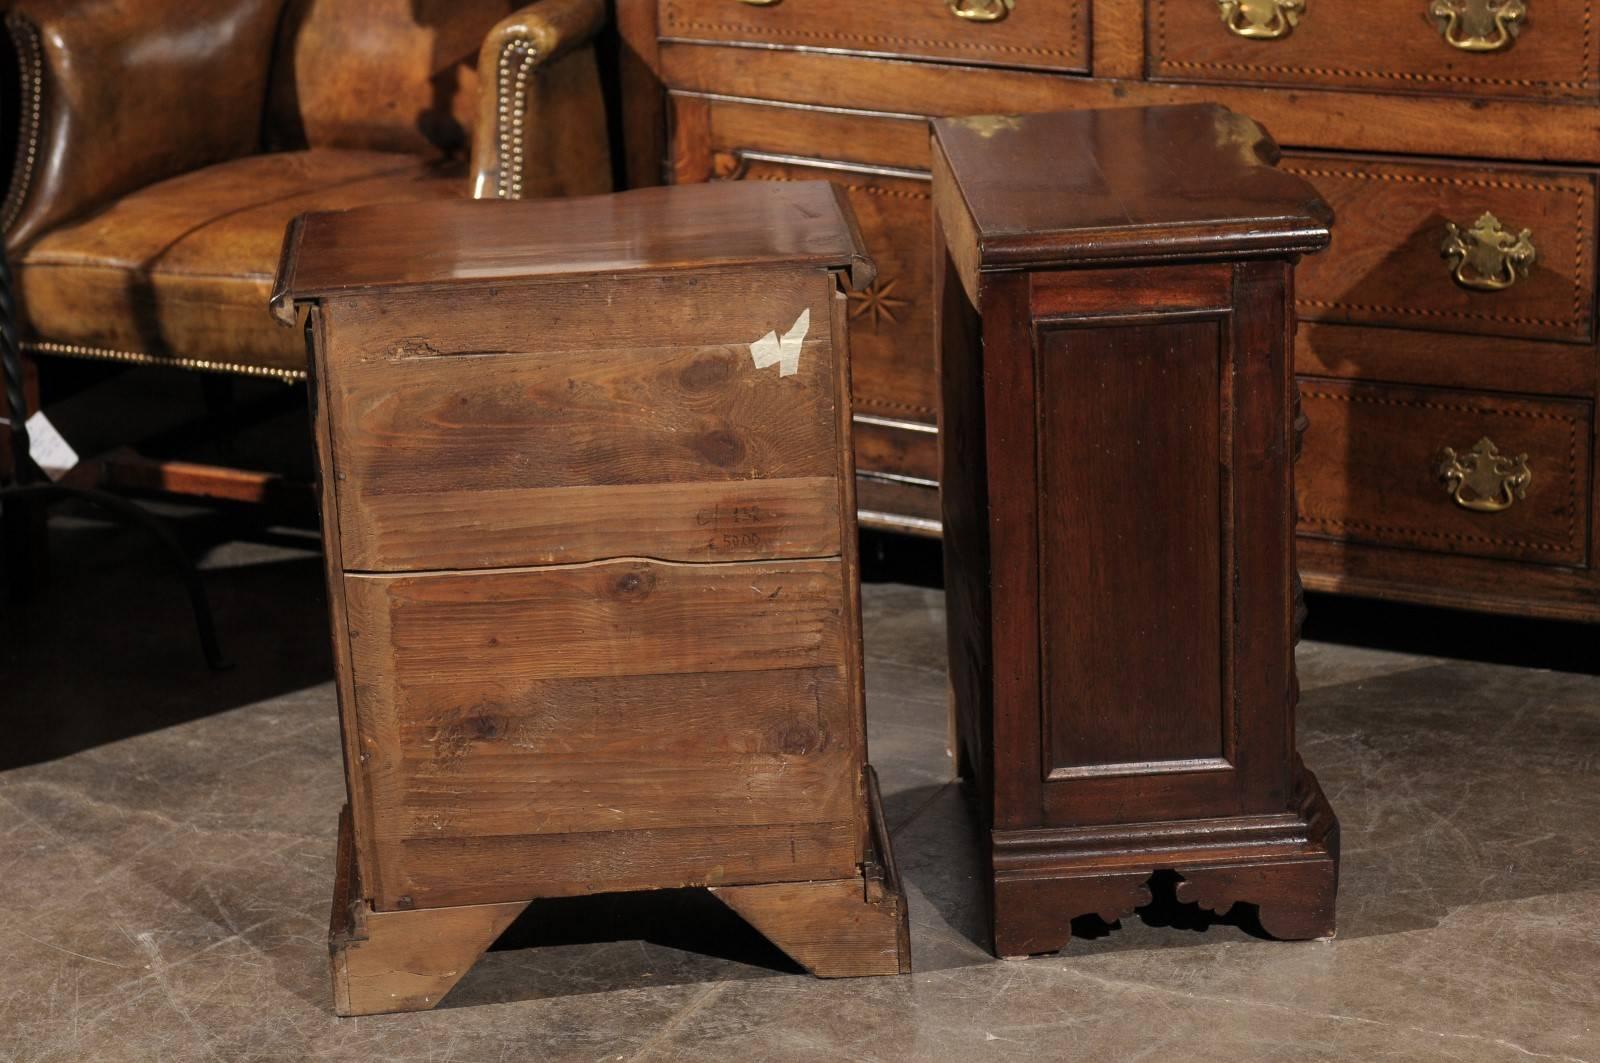 20th Century Pair of Petite Italian Commodes with Crossbow Profile and Drawers from the 1930s